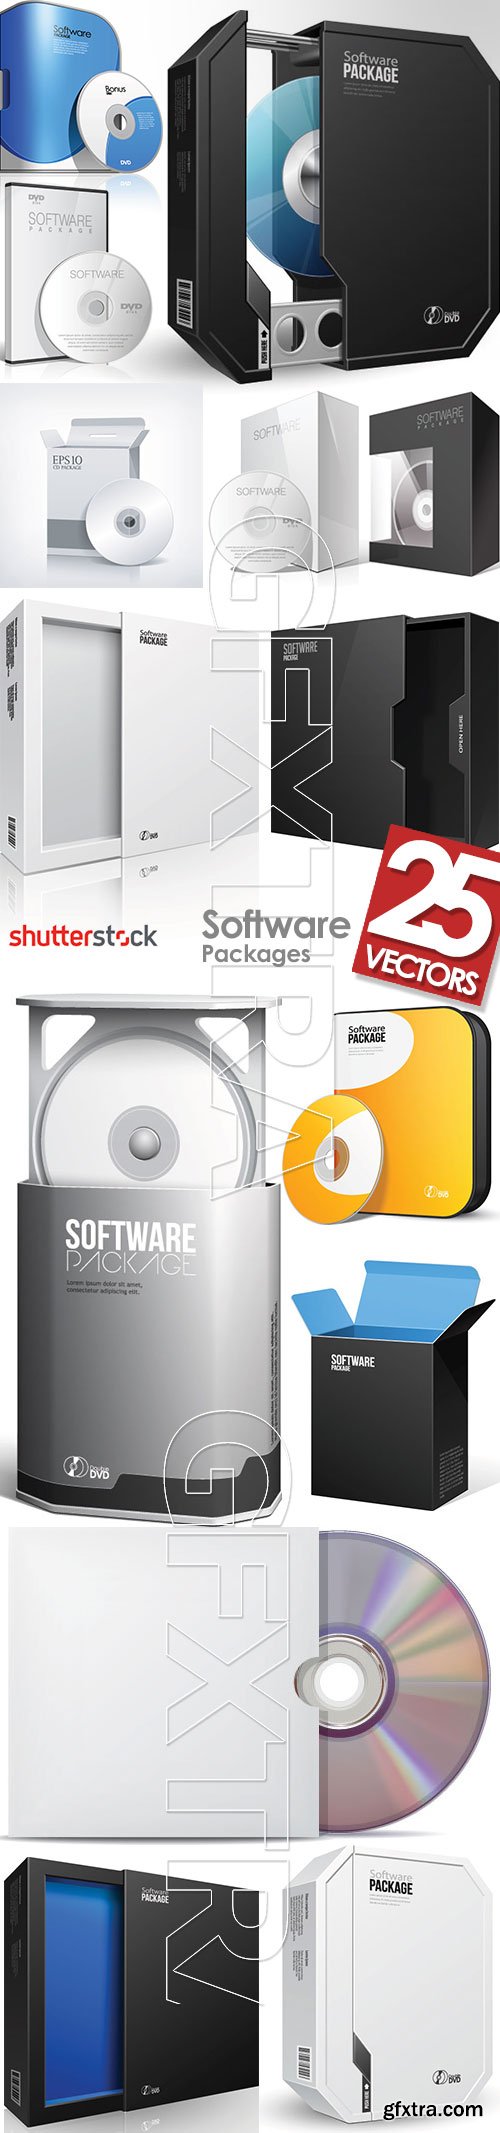 Software Packages 1, 25xEPS